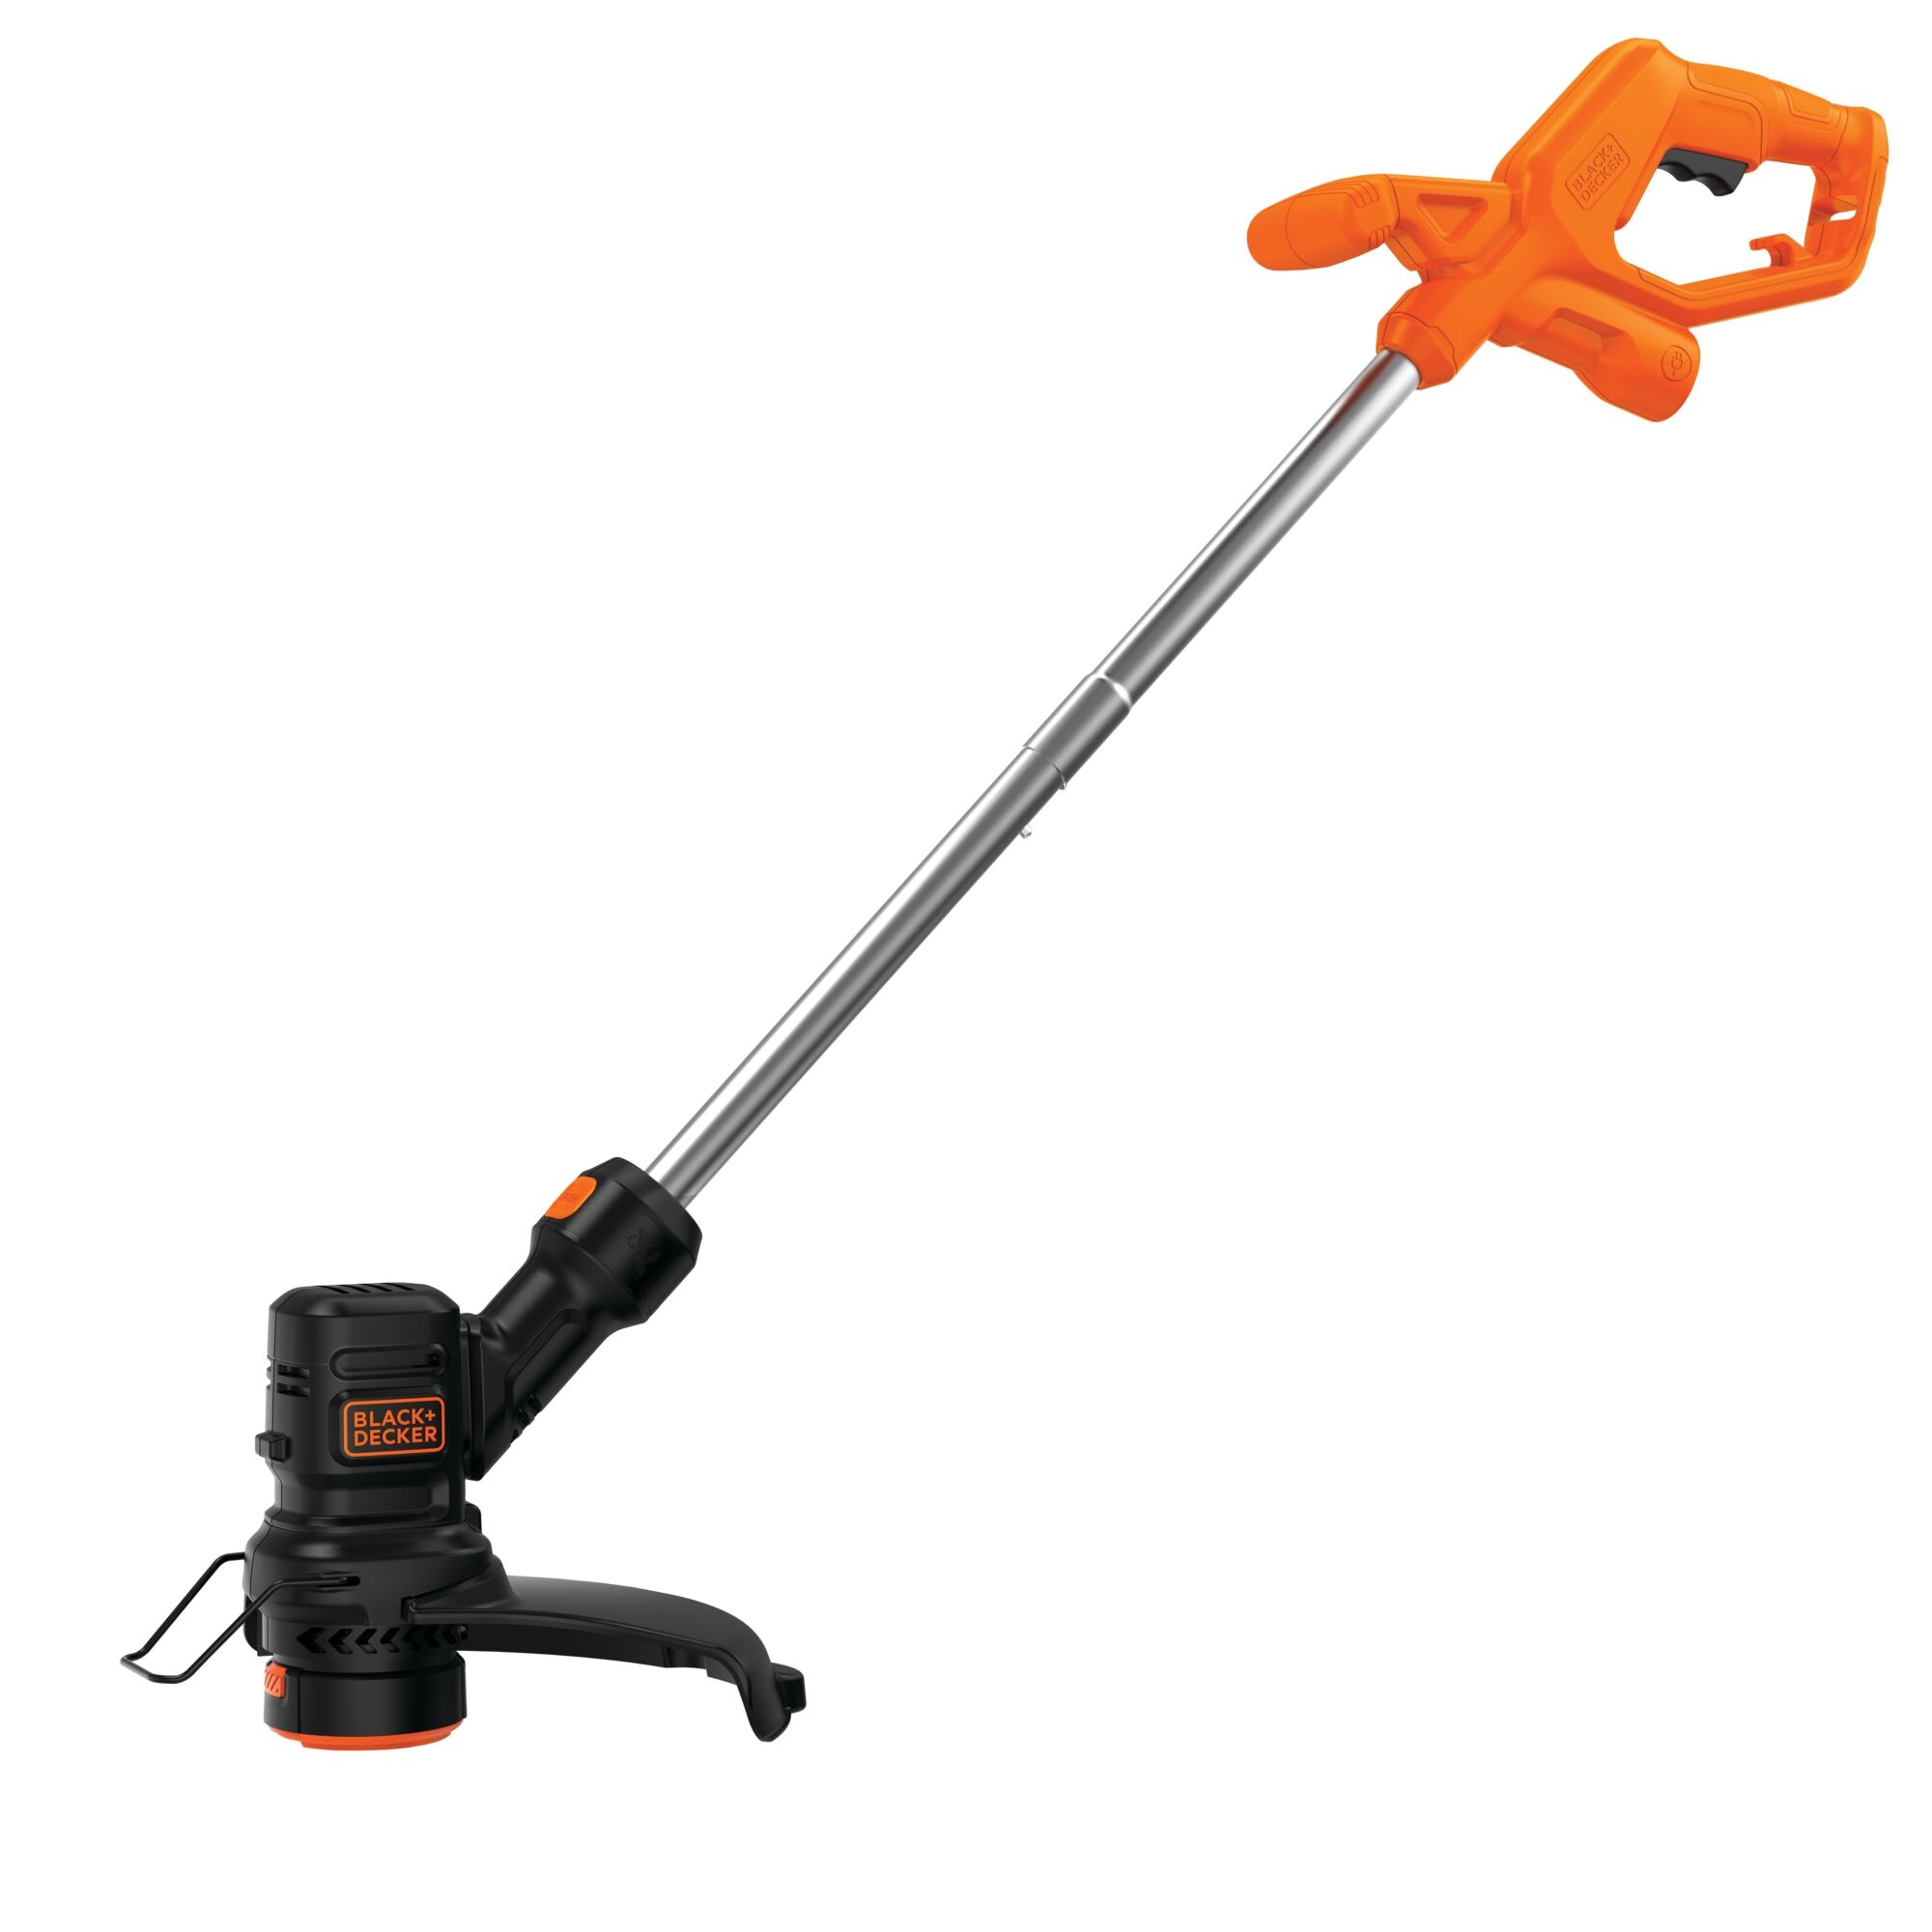 3.8 Amp 13 in. Electric String Trimmer